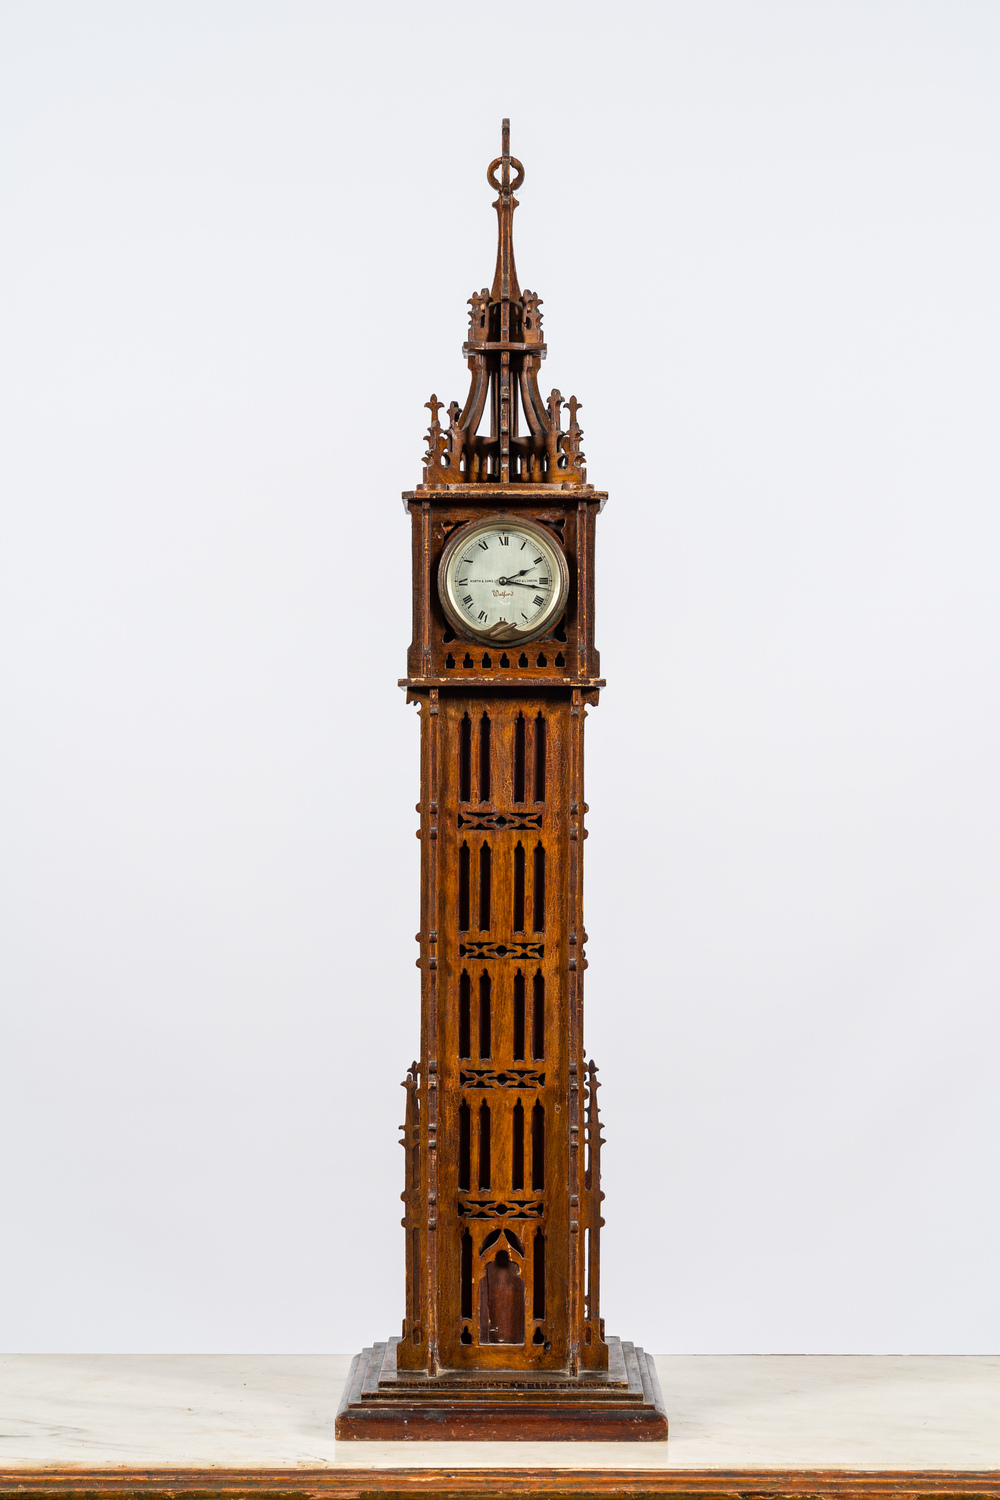 An English Gothic Revival wooden 'Big Ben' tower clock, ca. 1900